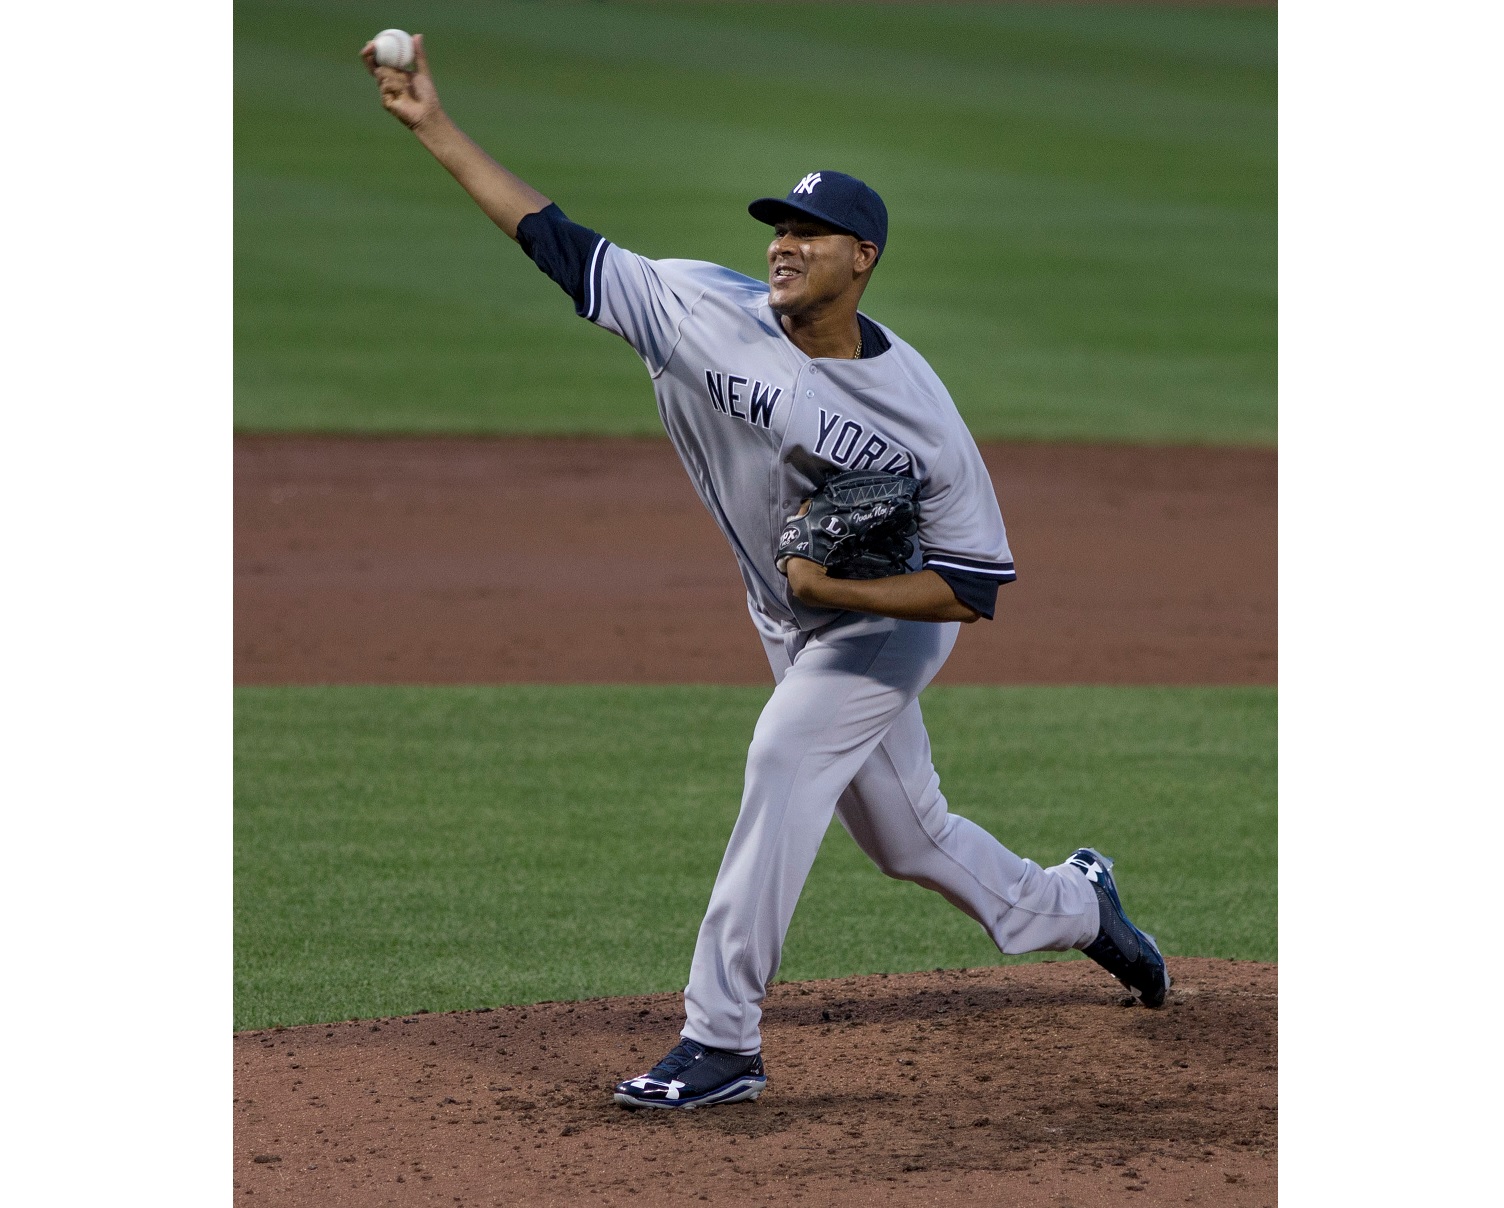 Now that the season is over, the New York Yankees are shifting their focus for the next year with hopes of improving their lineup, rotation and bullpen. One of the team’s supposed moves includes acquiring pitcher Ivan Nova. The Yankees are reportedly planning to present a contract offer to Nova on 2016, according to Joel Sherman of New York Post.